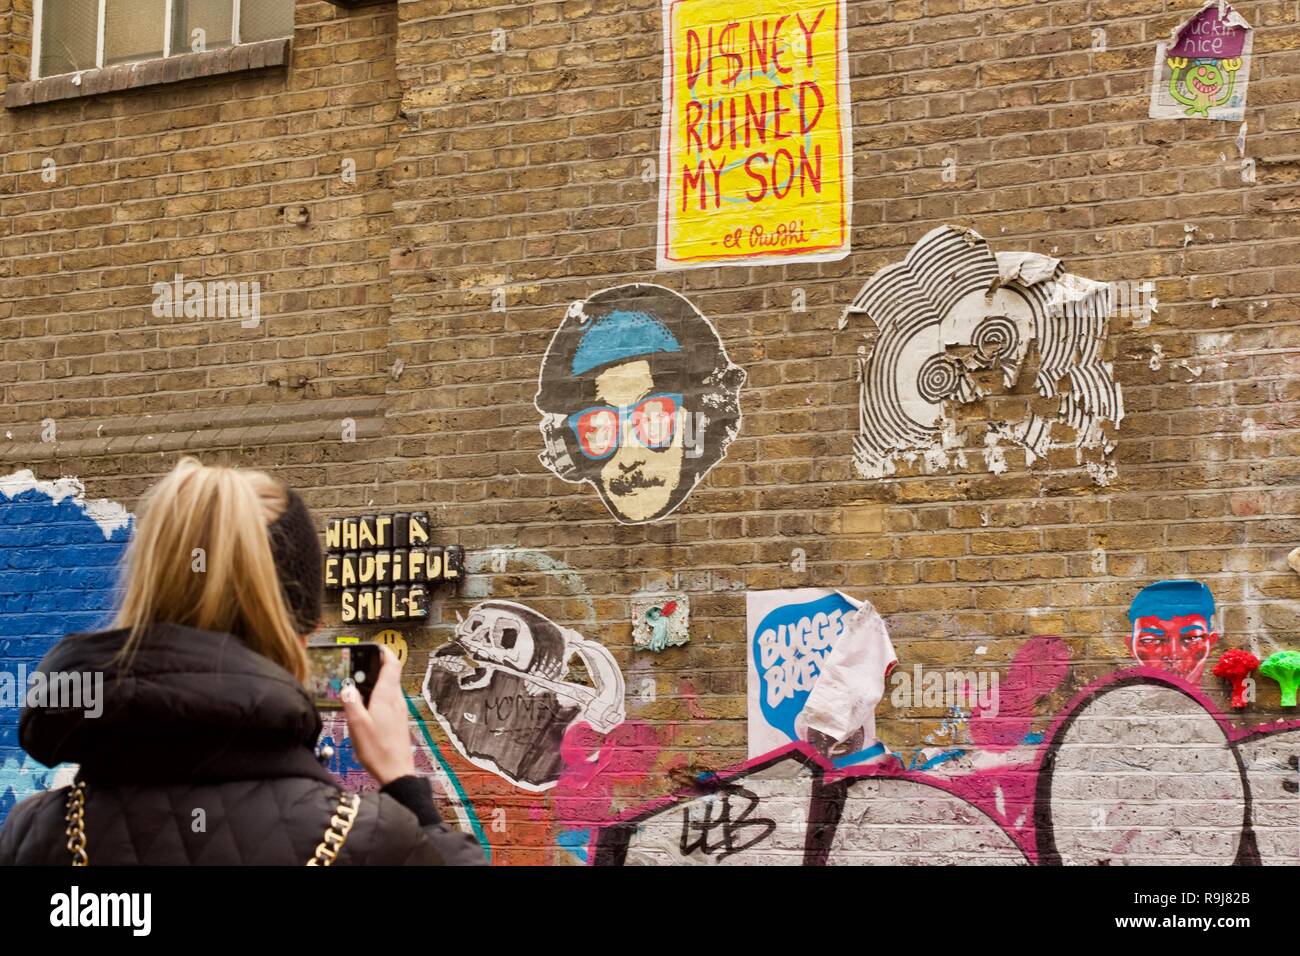 A woman taking a photo on her iPhone of graffiti on Brick Lane, East London Stock Photo